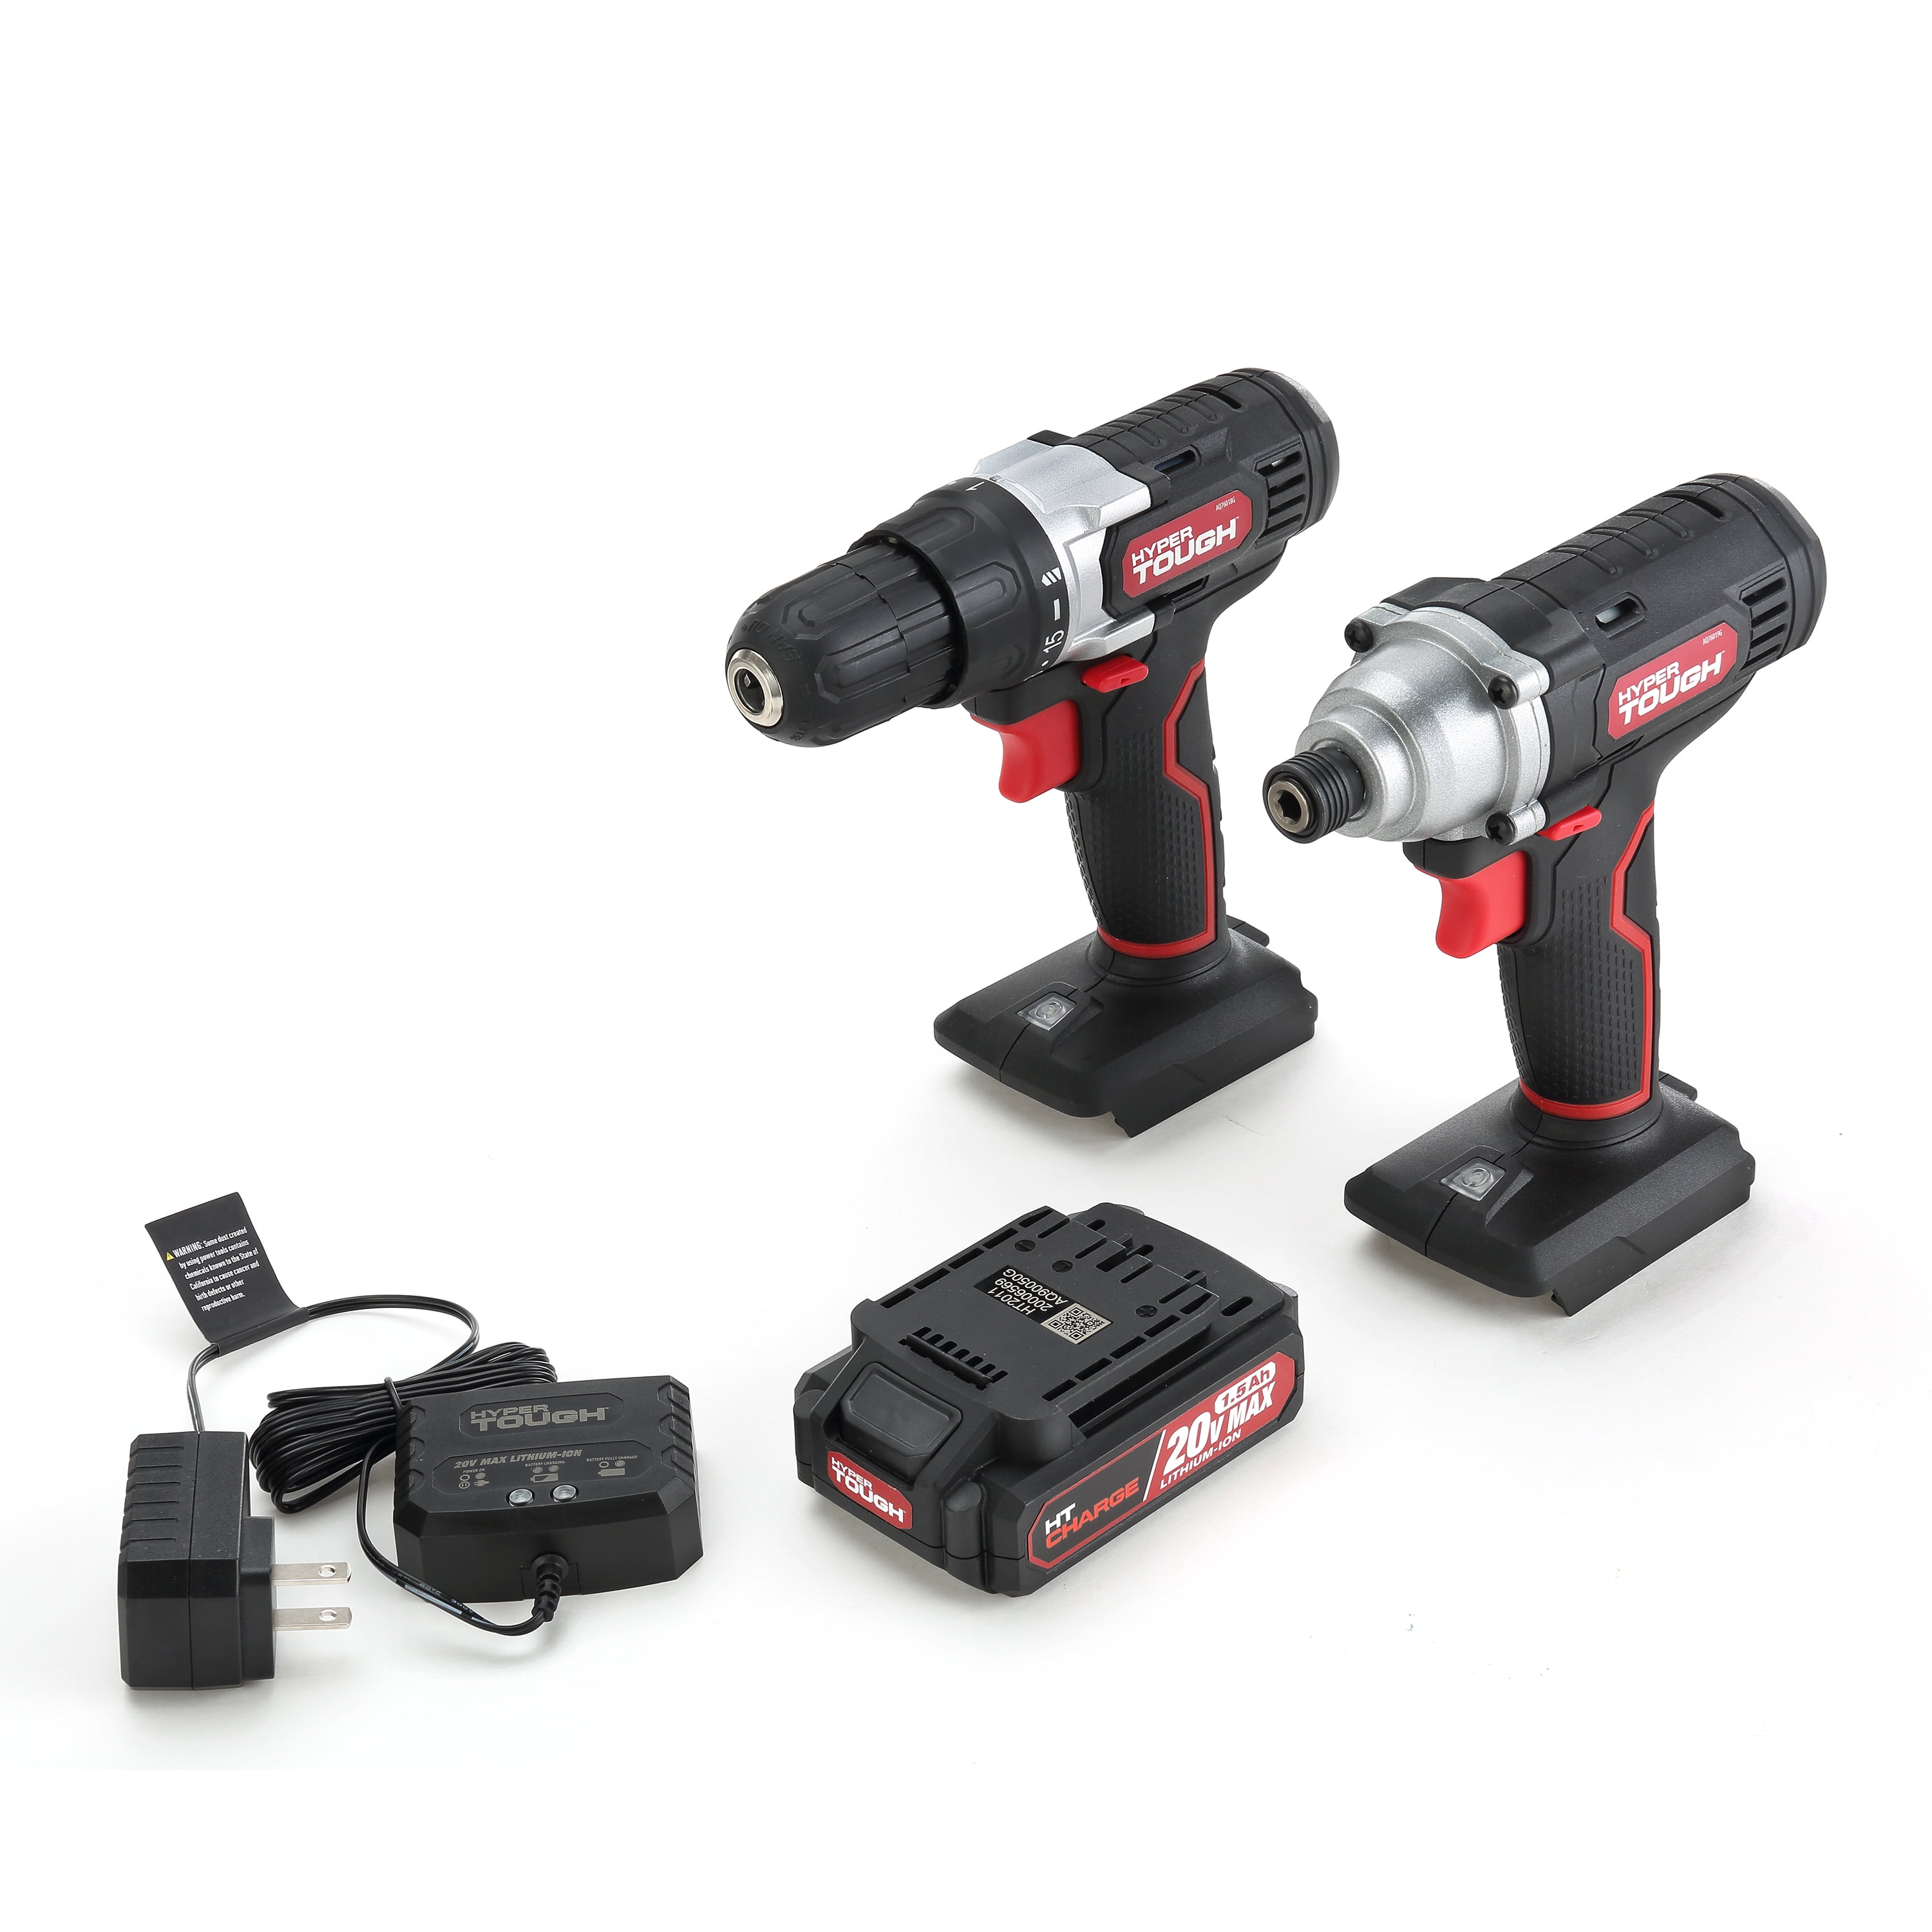  20V MAX Lithium-ion Cordless Drill Driver Set with 23+